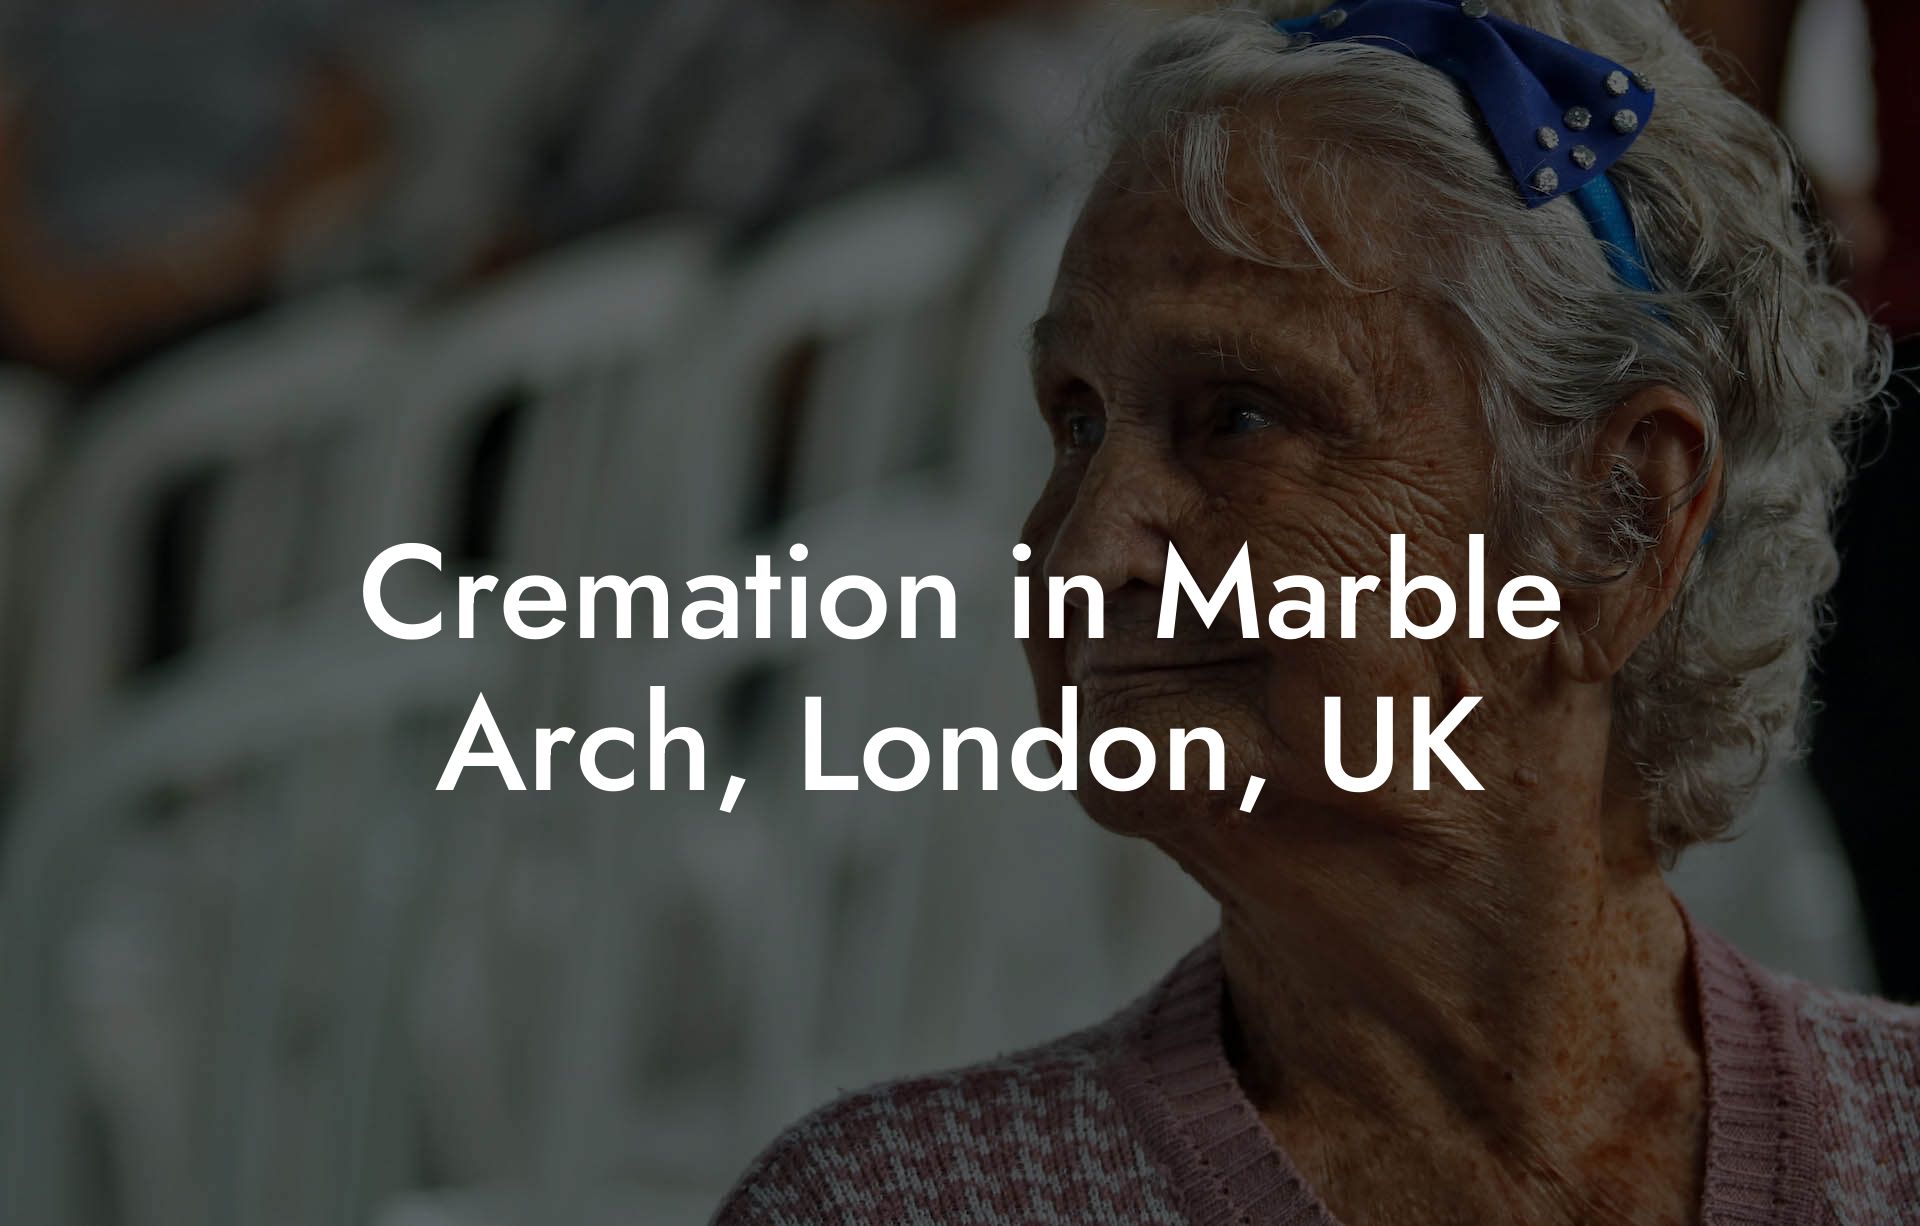 Cremation in Marble Arch, London, UK